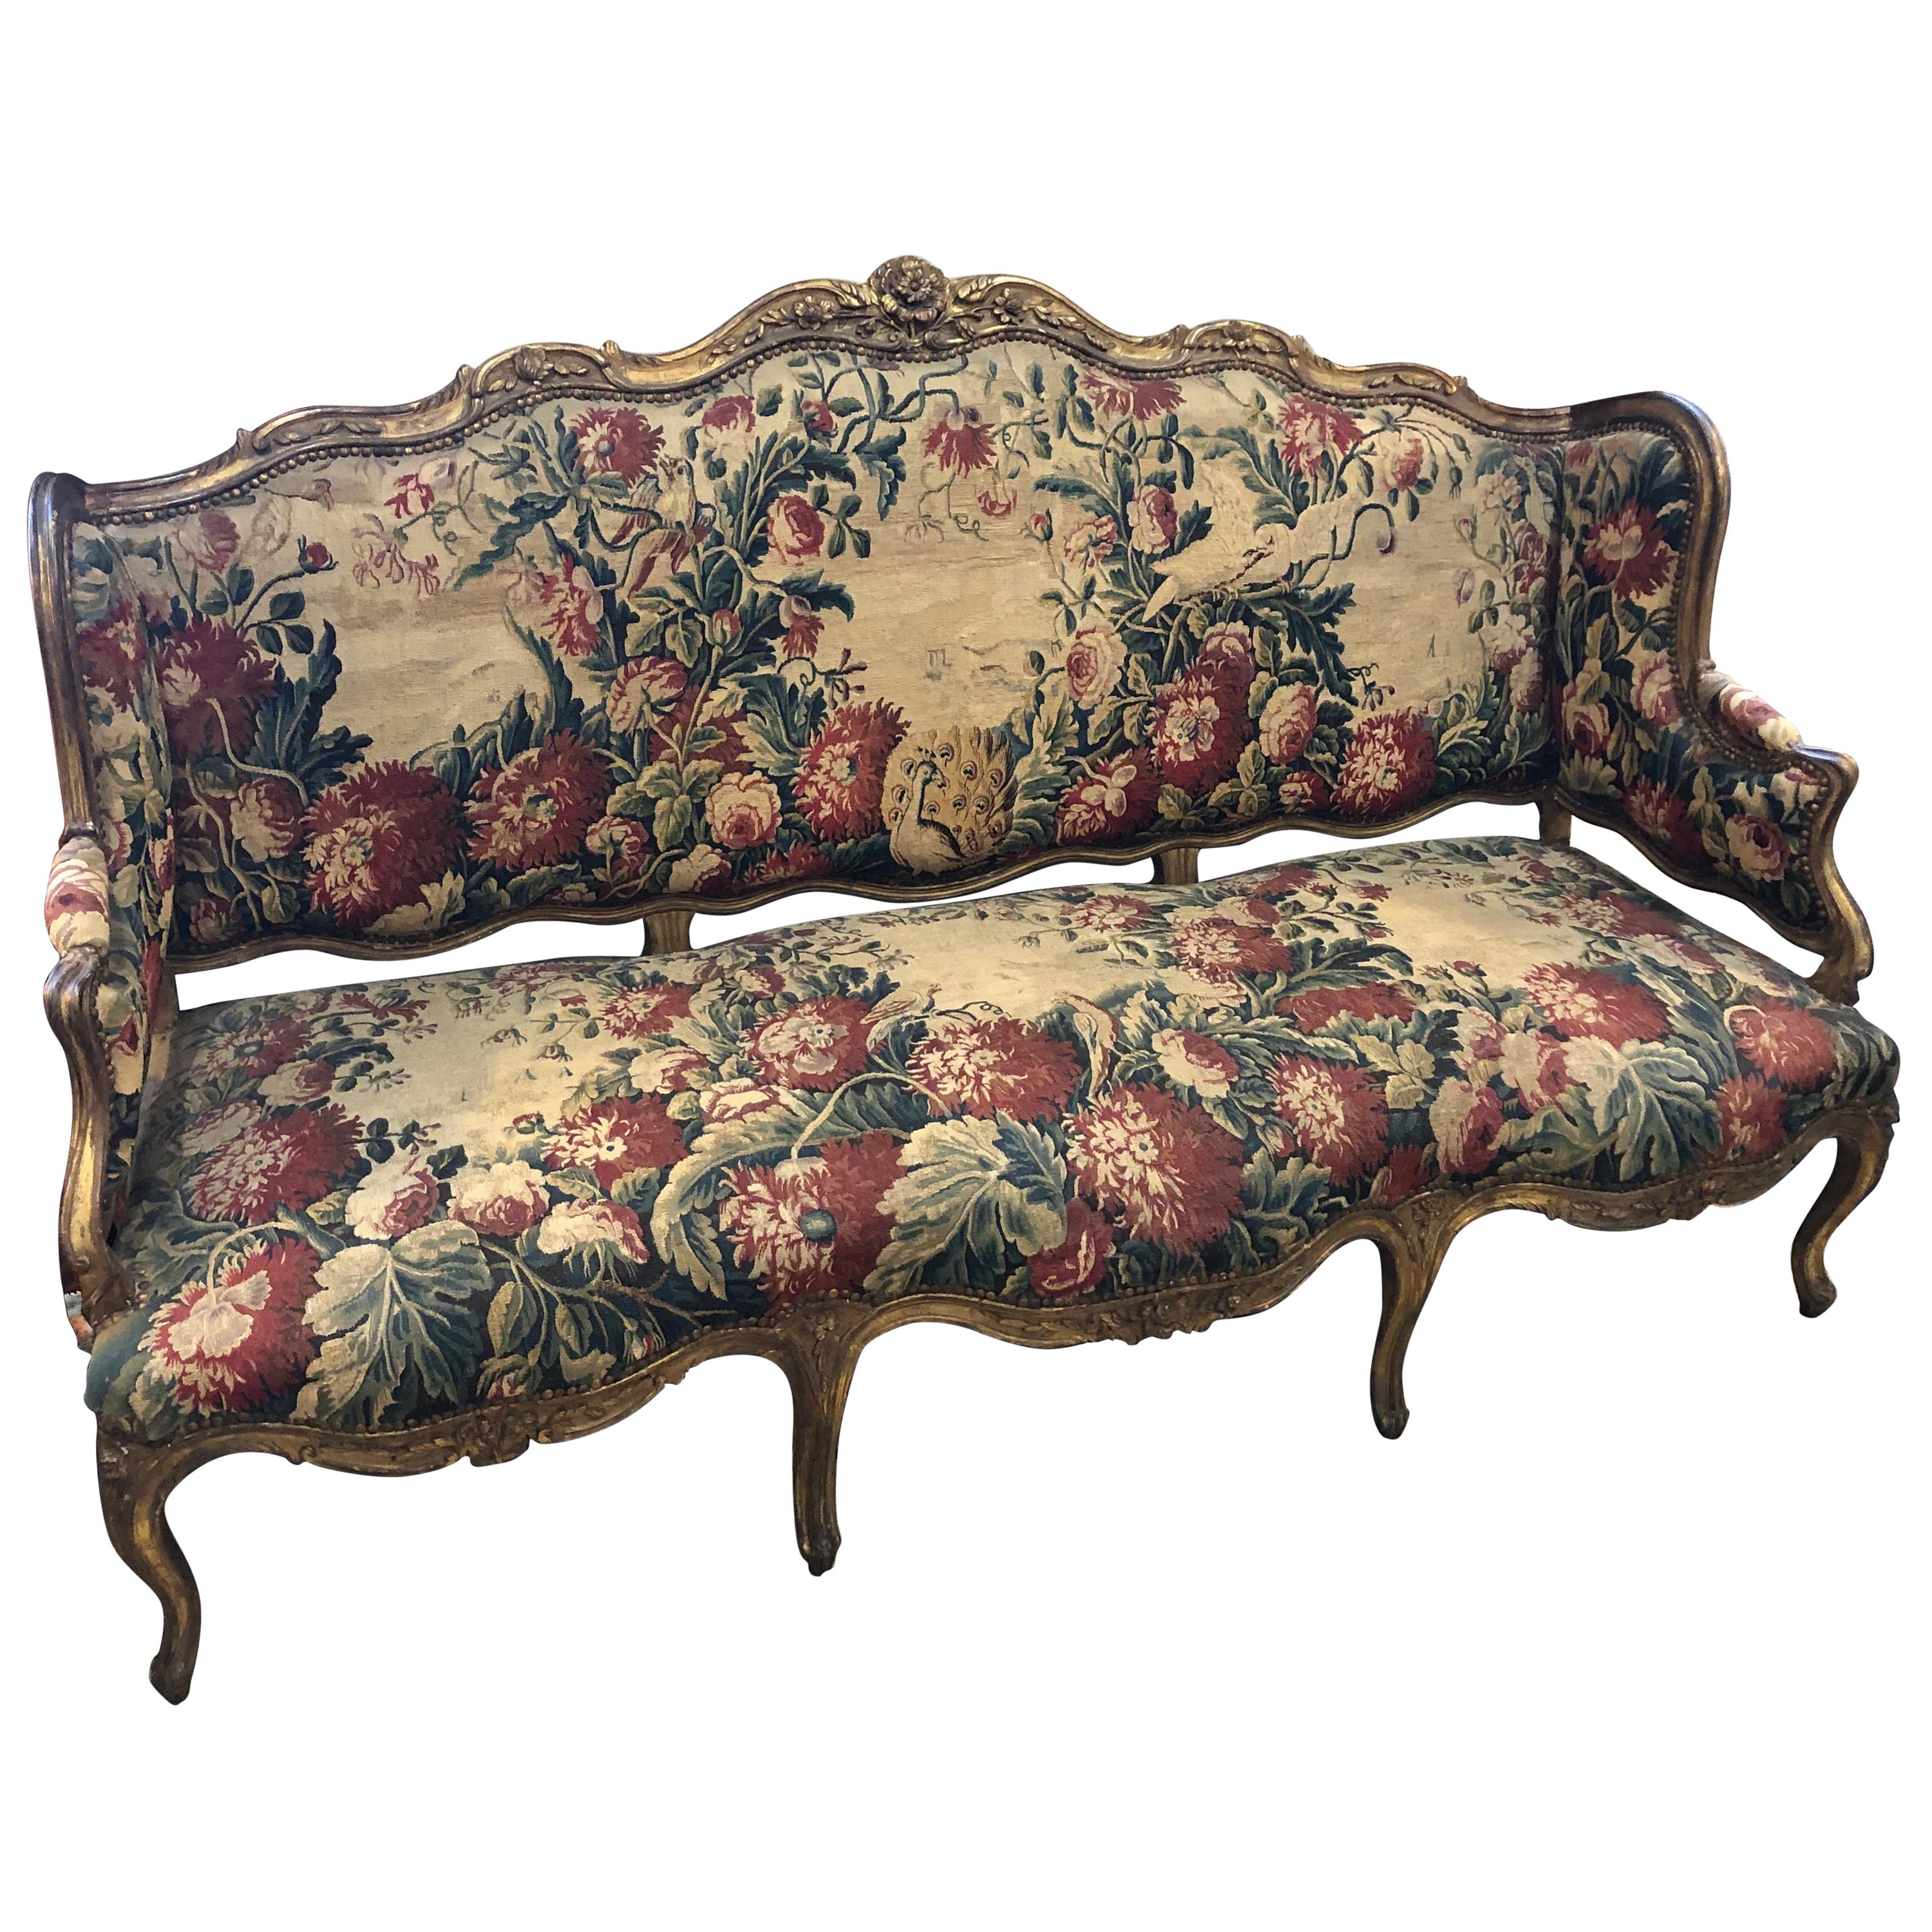 French Aubusson Canape, 18th Century For Sale